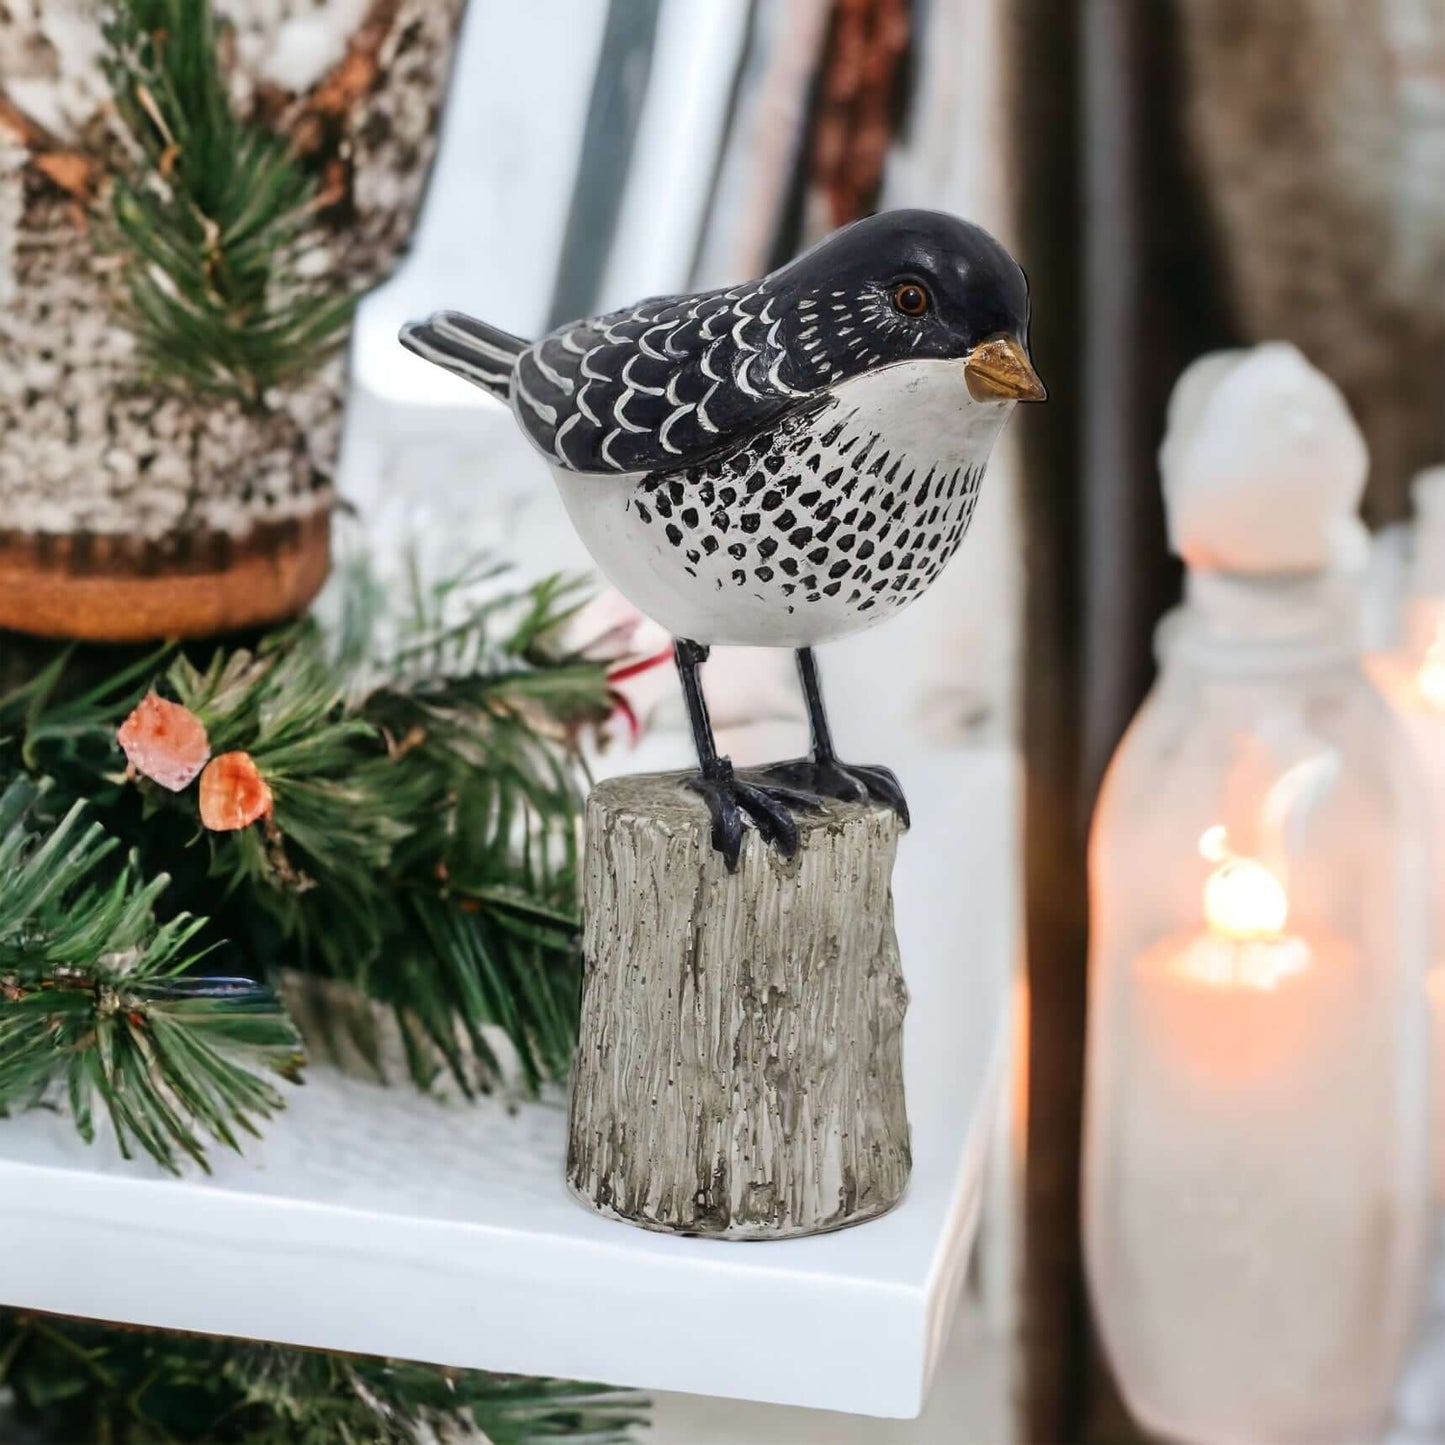 Bird Natural Black White Ornament - The Renmy Store Homewares & Gifts 